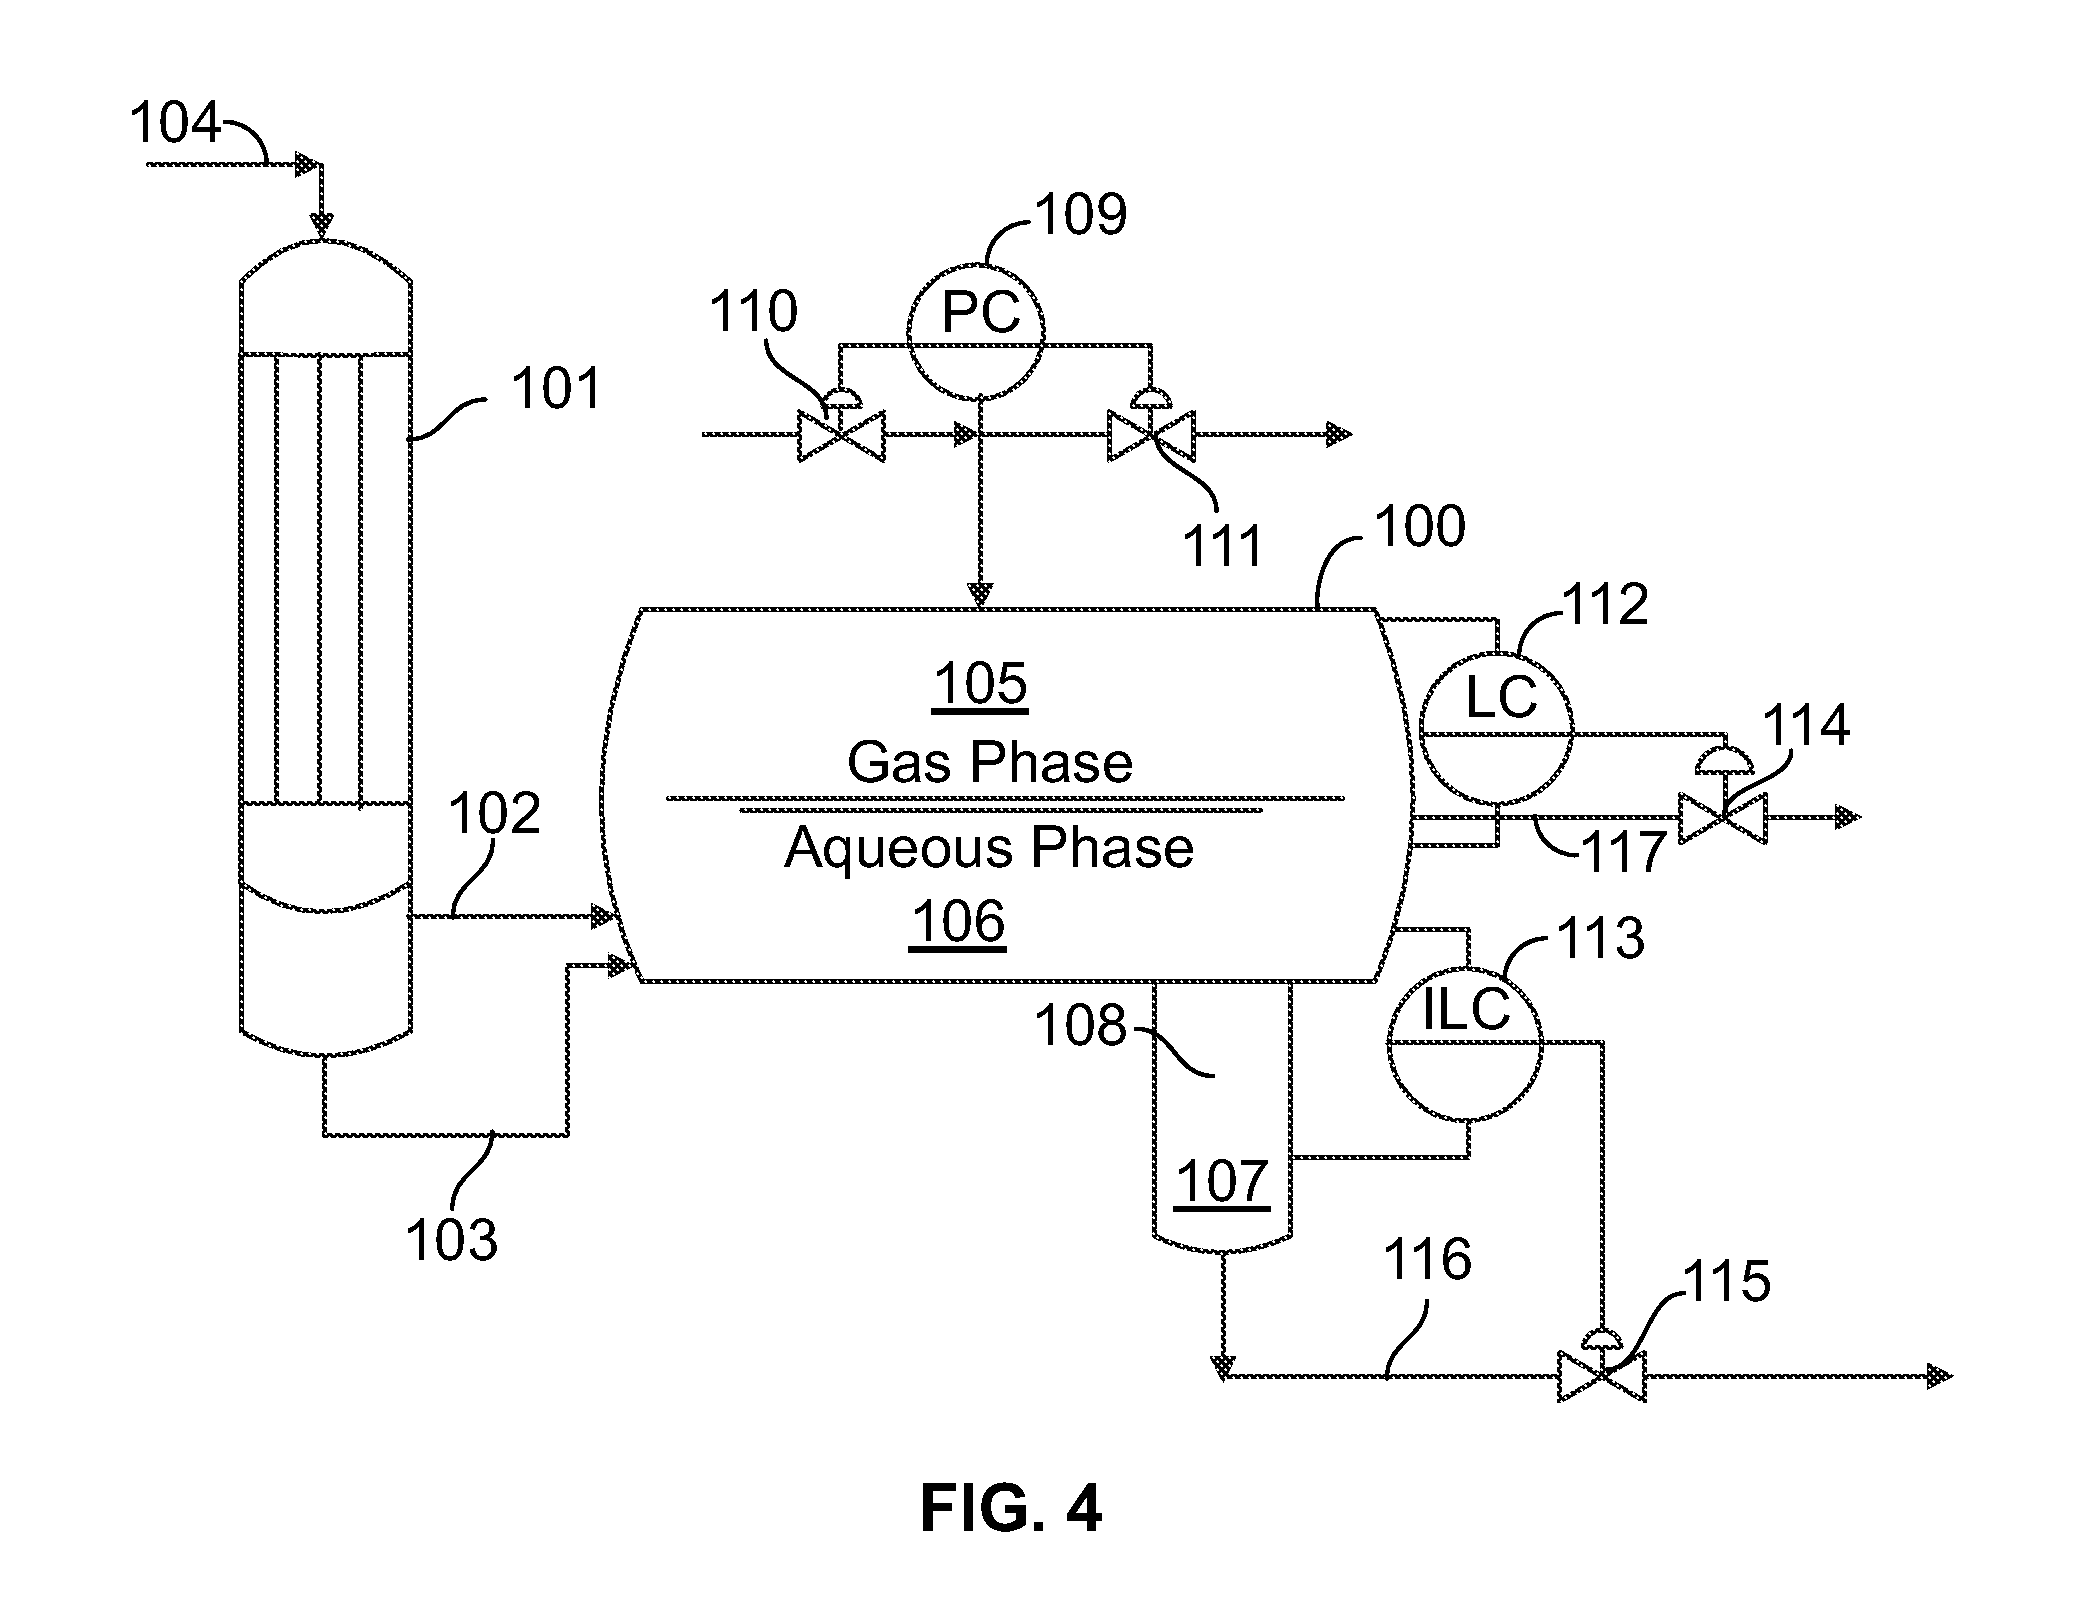 Three phase sulfur separation system with interface control